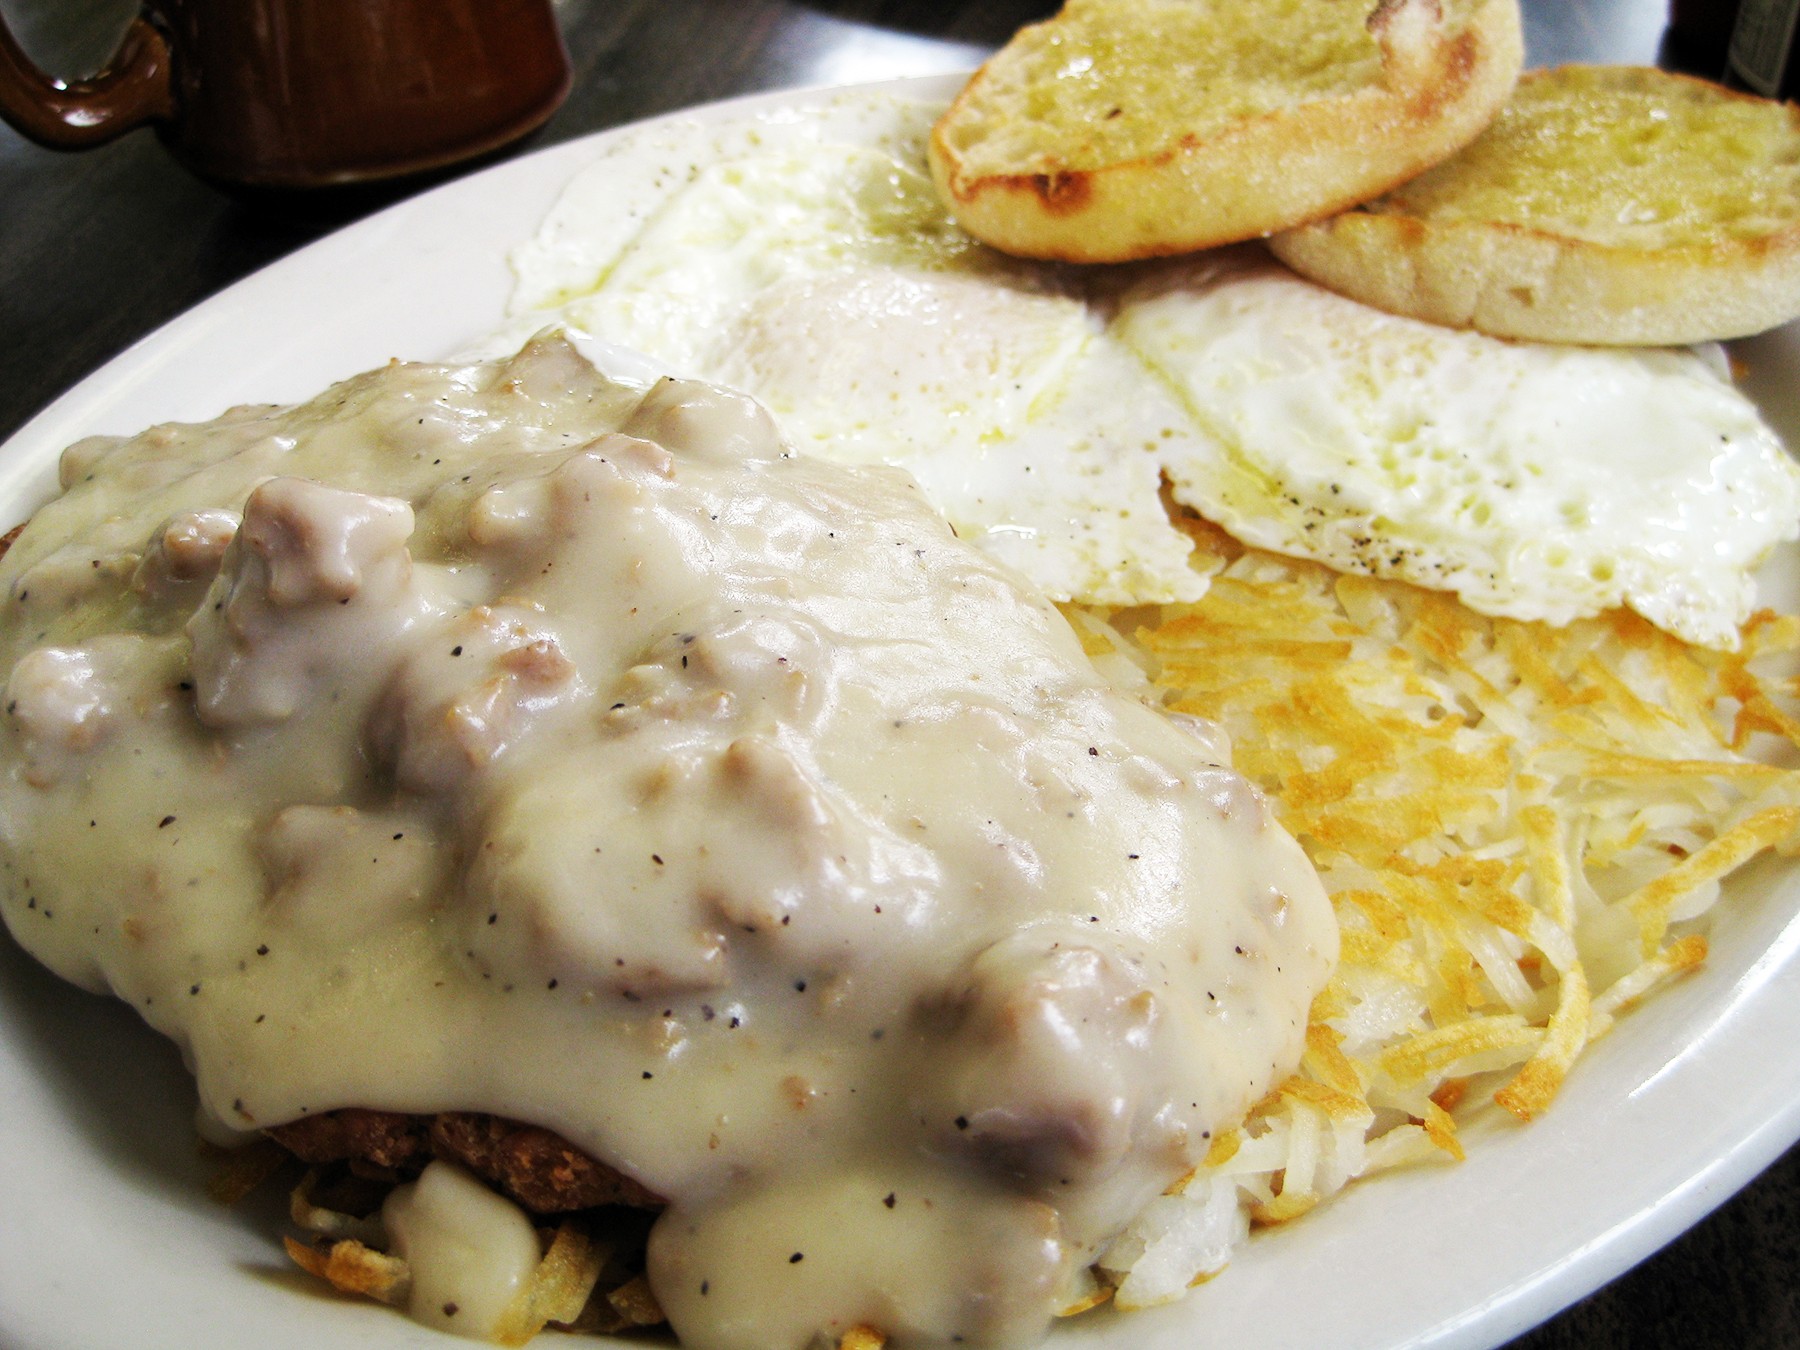 Chicken fried steak and eggs. You're not going to work after this. - JENNIFER FUMIKO CAHILL